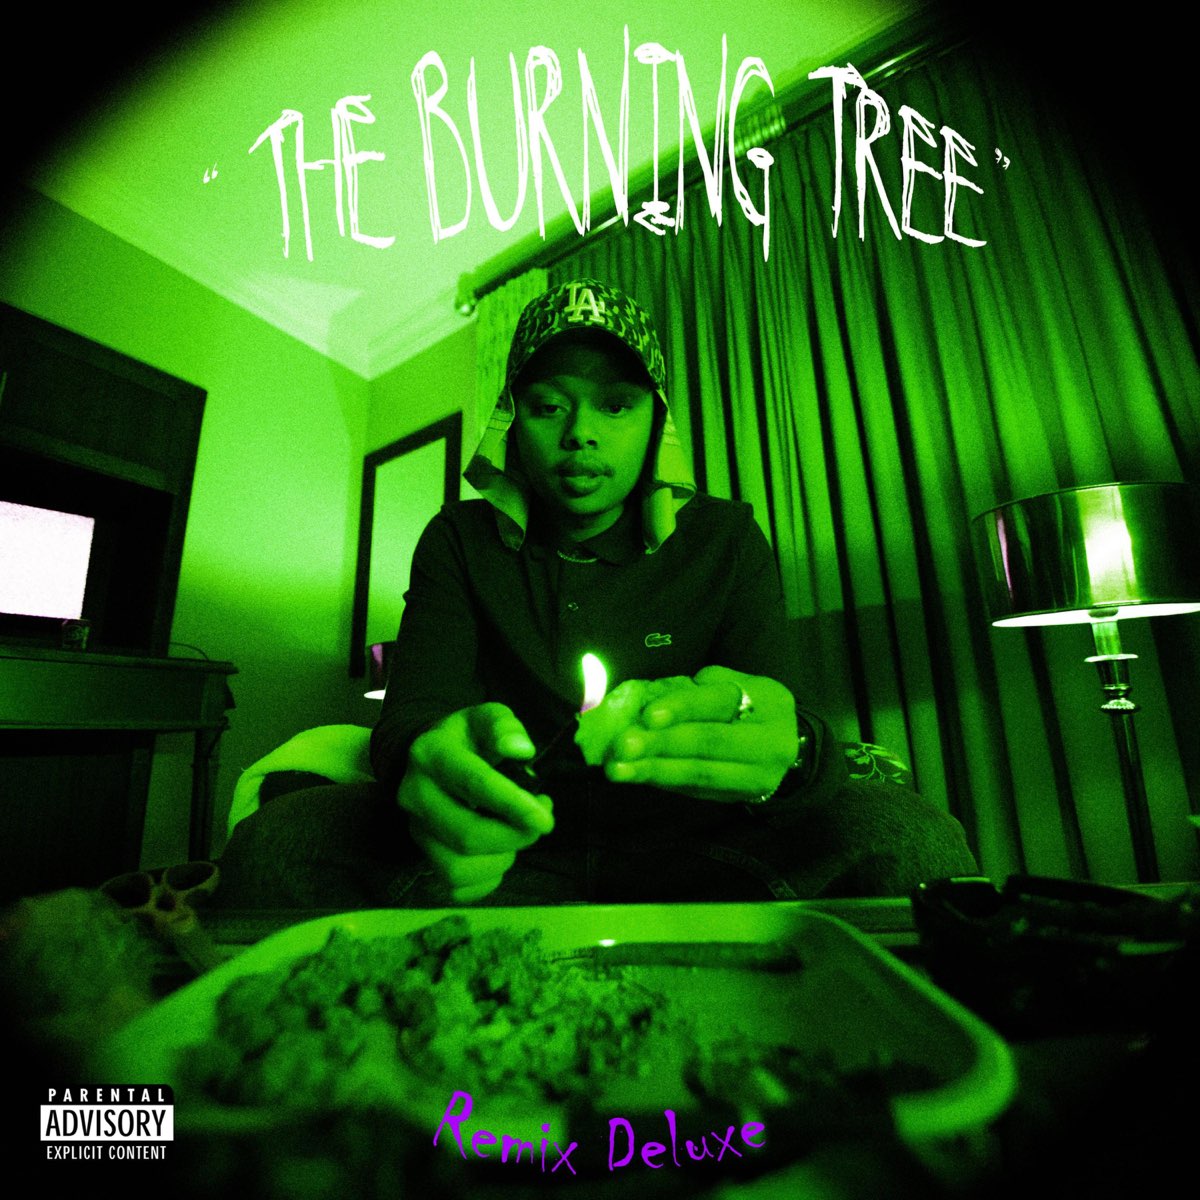 ‎The Burning Tree: Remix Deluxe - Album by A-Reece - Apple Music